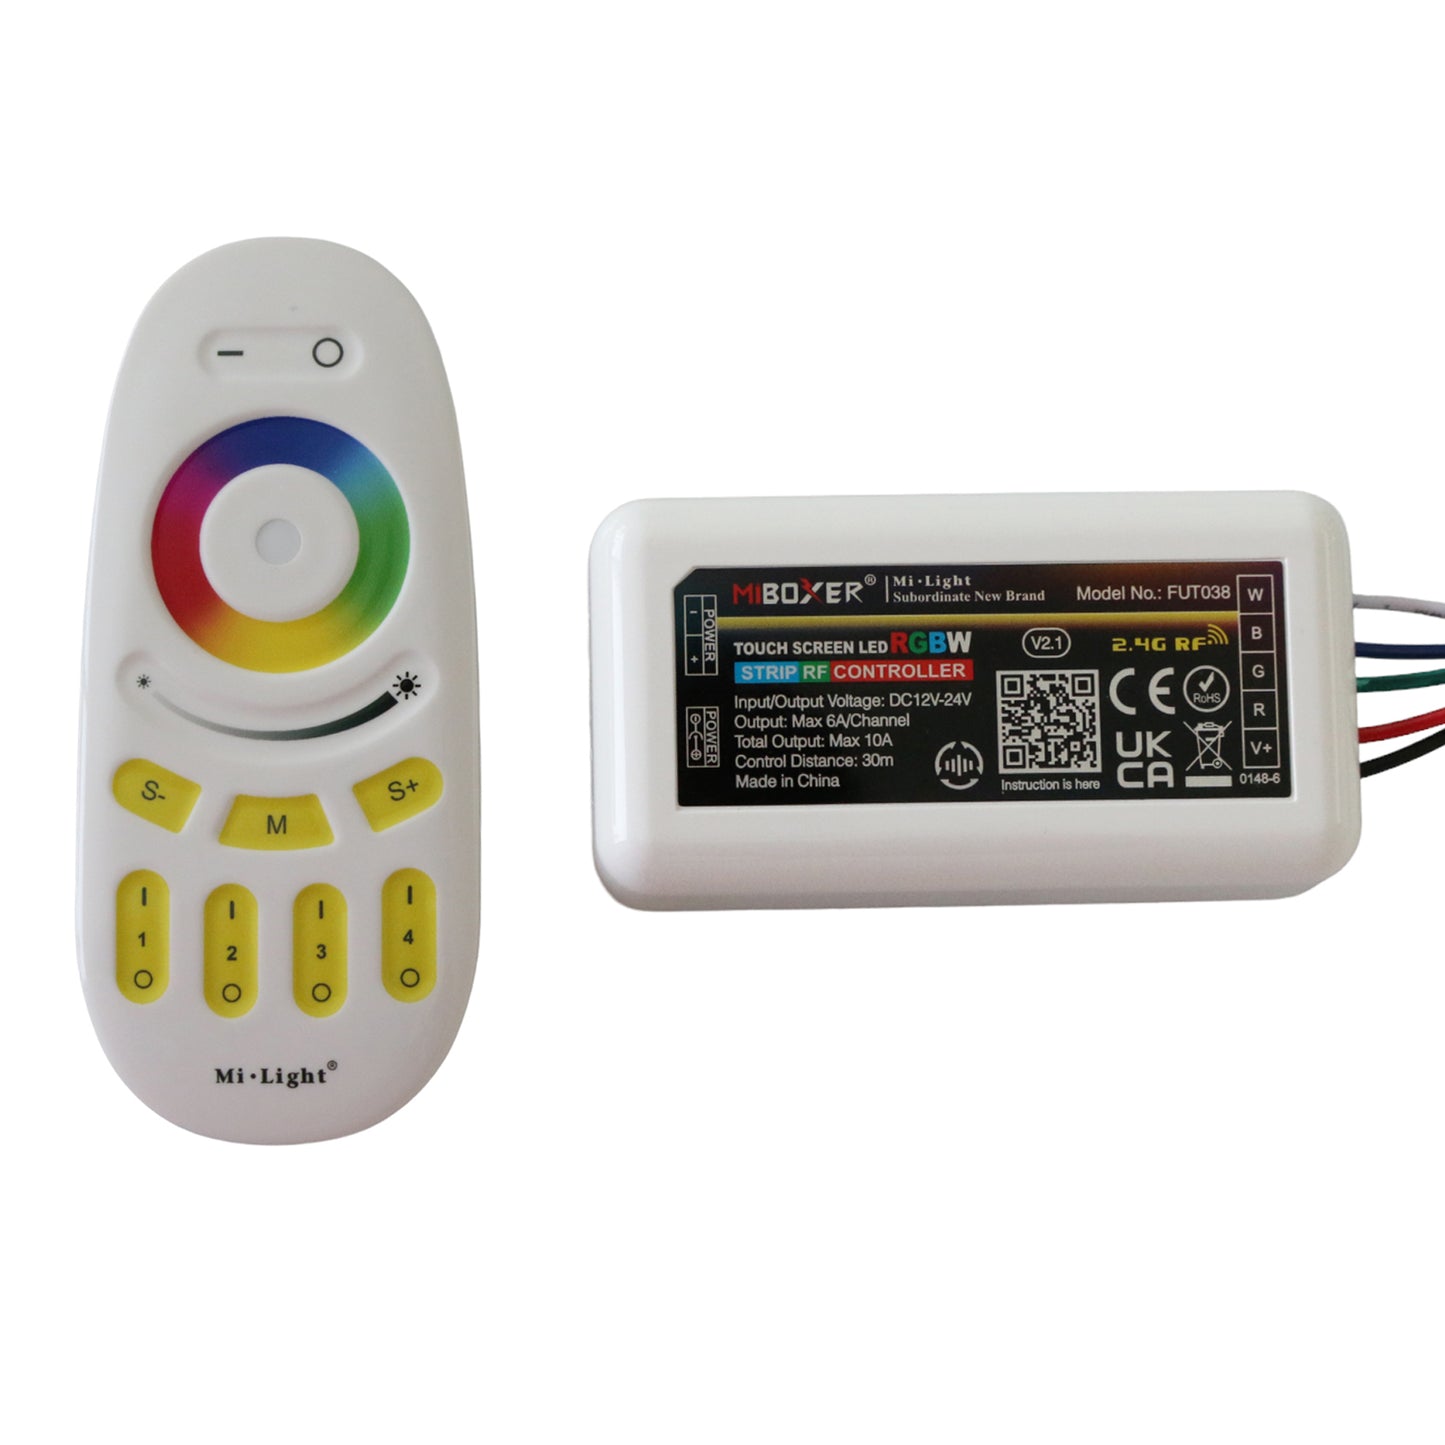 Controller and Remote for RGBW LED Strip Light